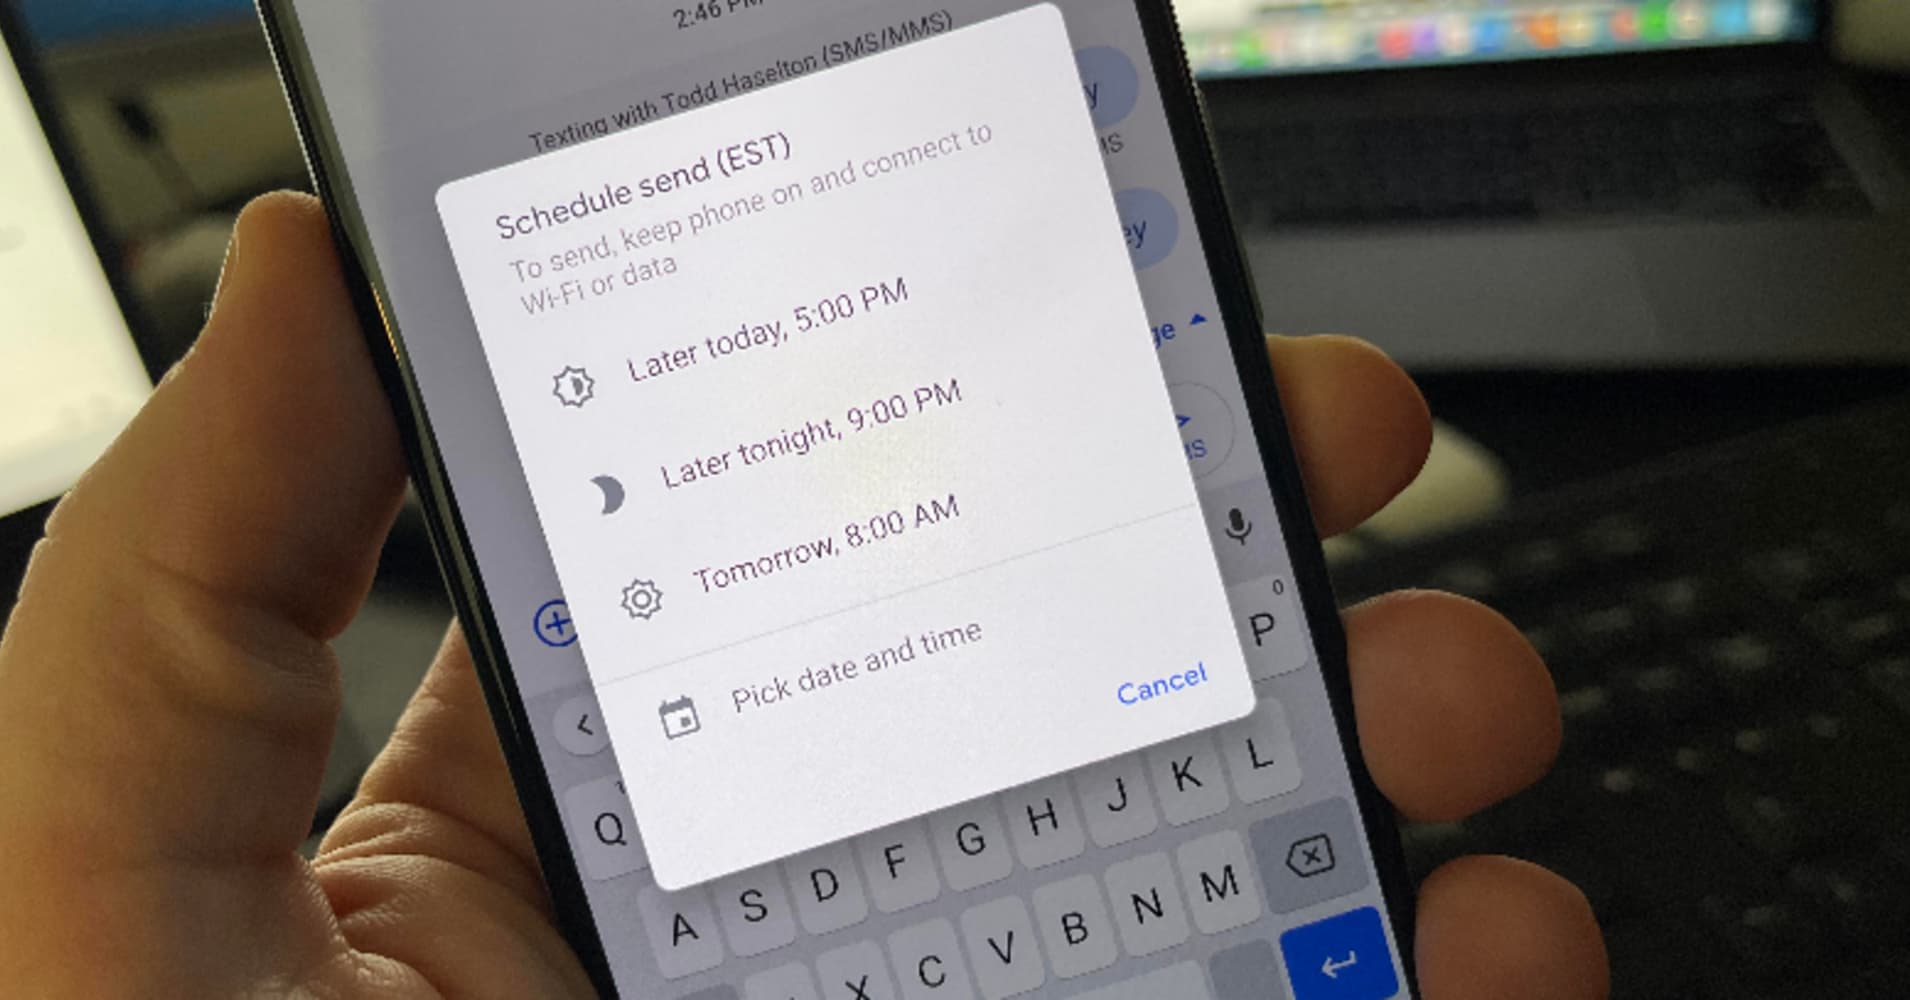 How to schedule text messages on Android